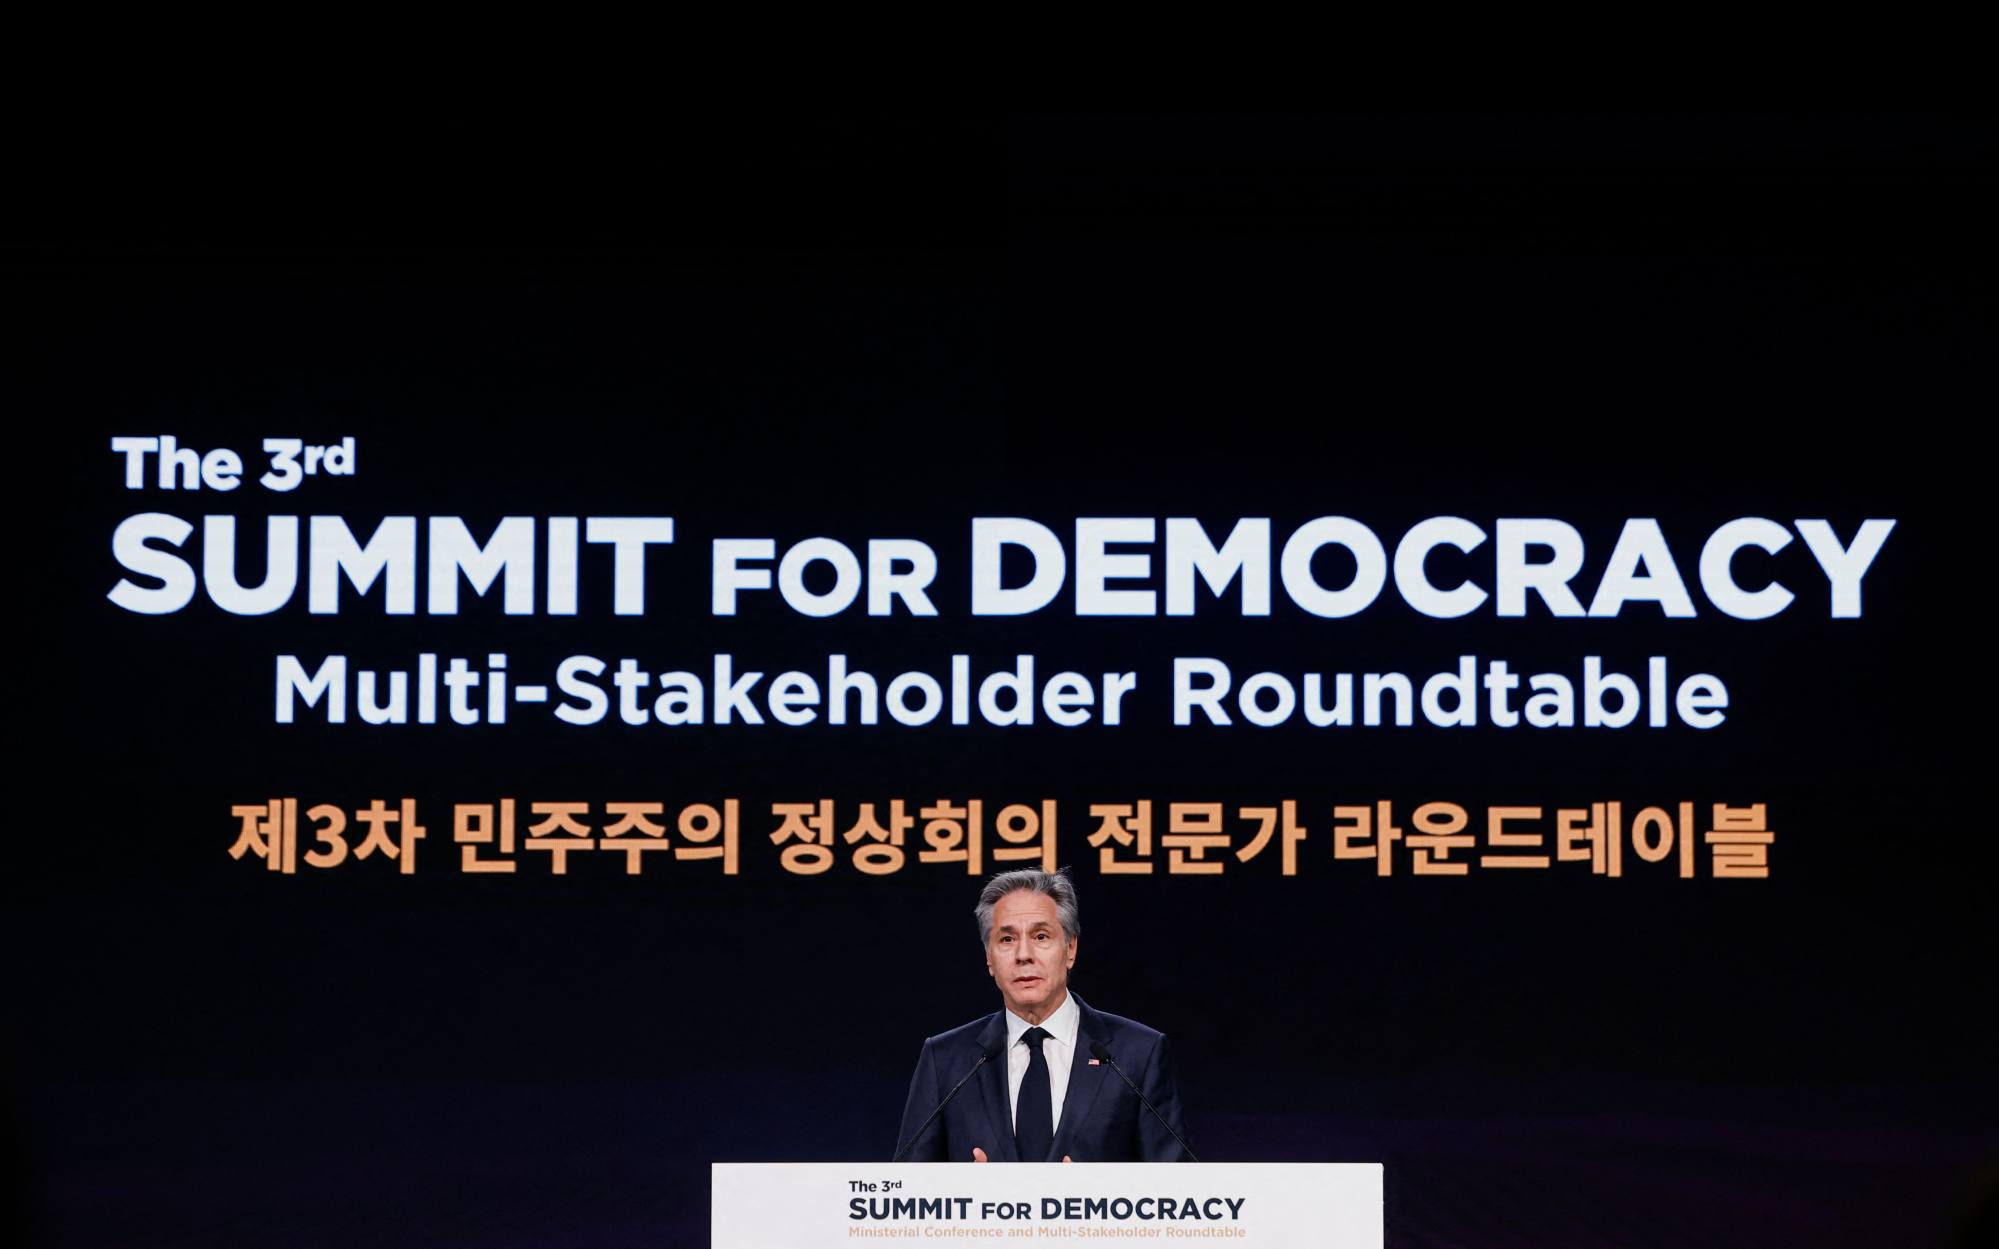 US Secretary of State Antony Blinken speaks at the Summit for Democracy in Seoul on Monday. Photo: AFP